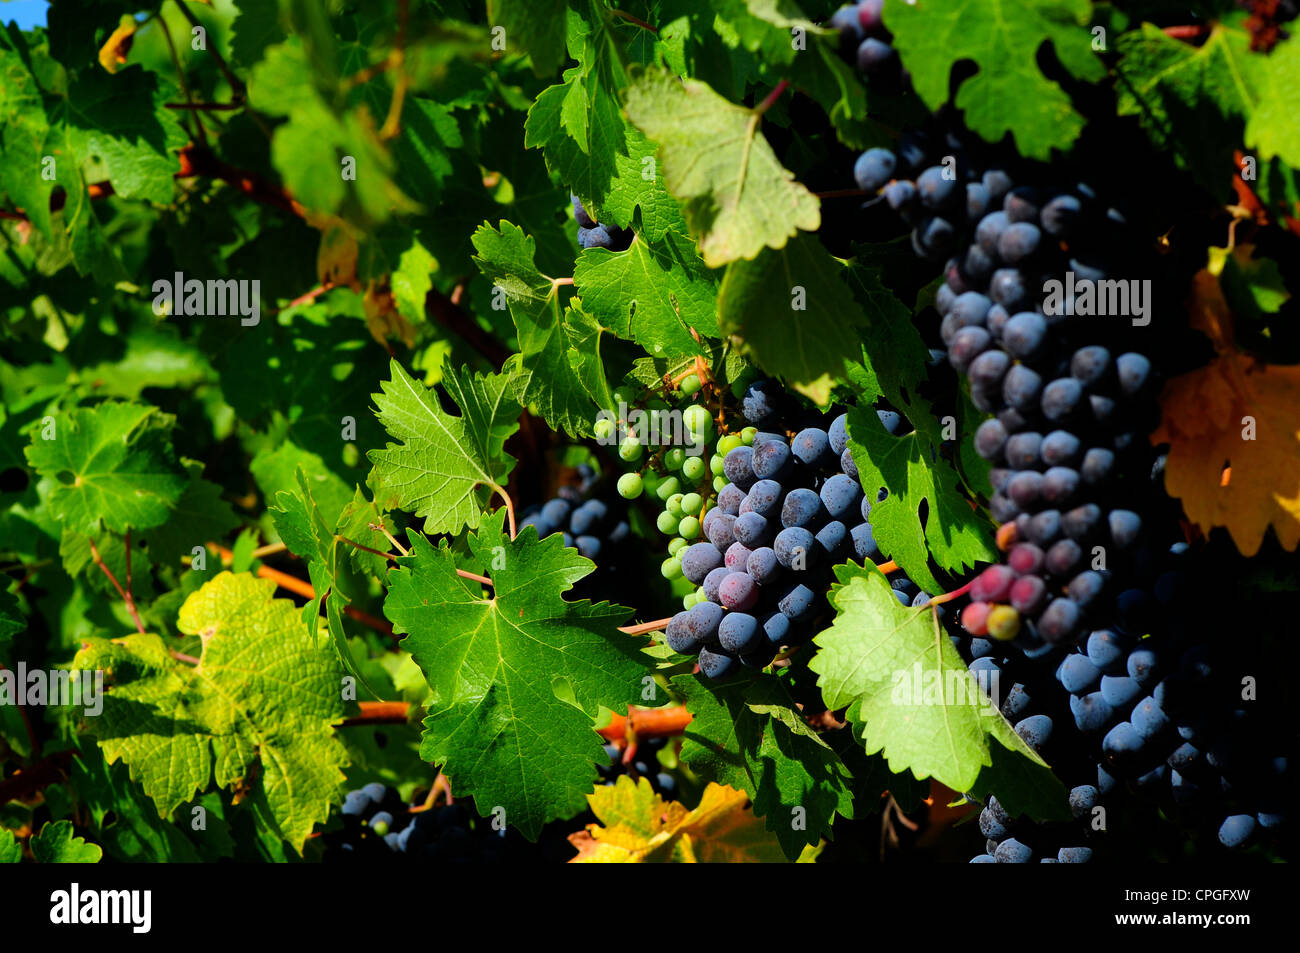 Zinfandel grapes growing on vines in the Sonoma / Napa region, California, USA Stock Photo